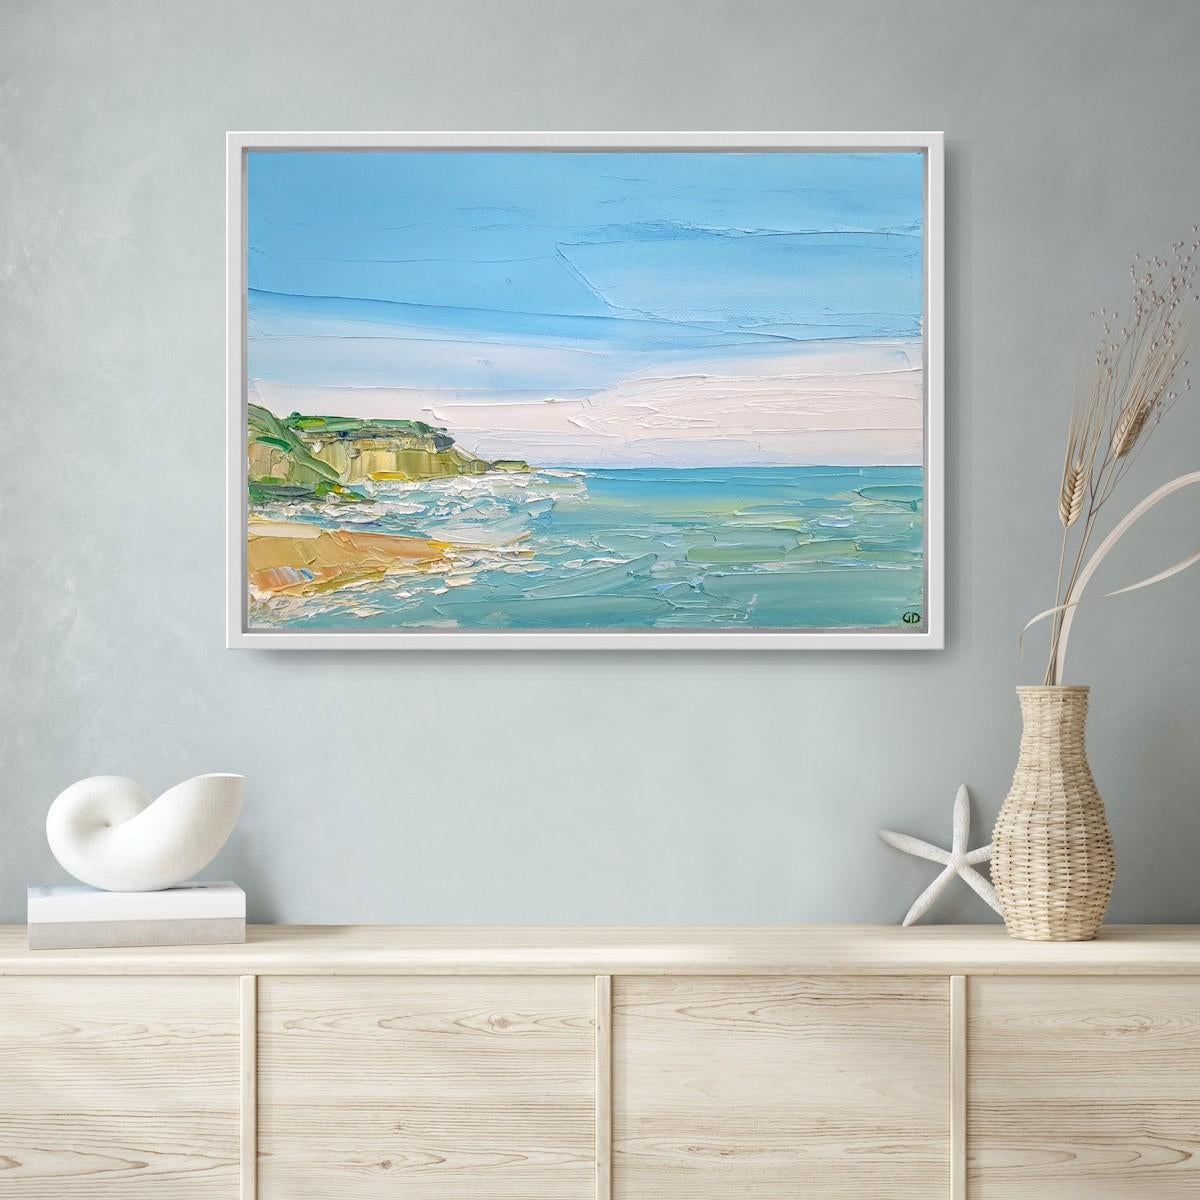 Rock-A-Nore beach, Hastings - Painting by Georgie Dowling